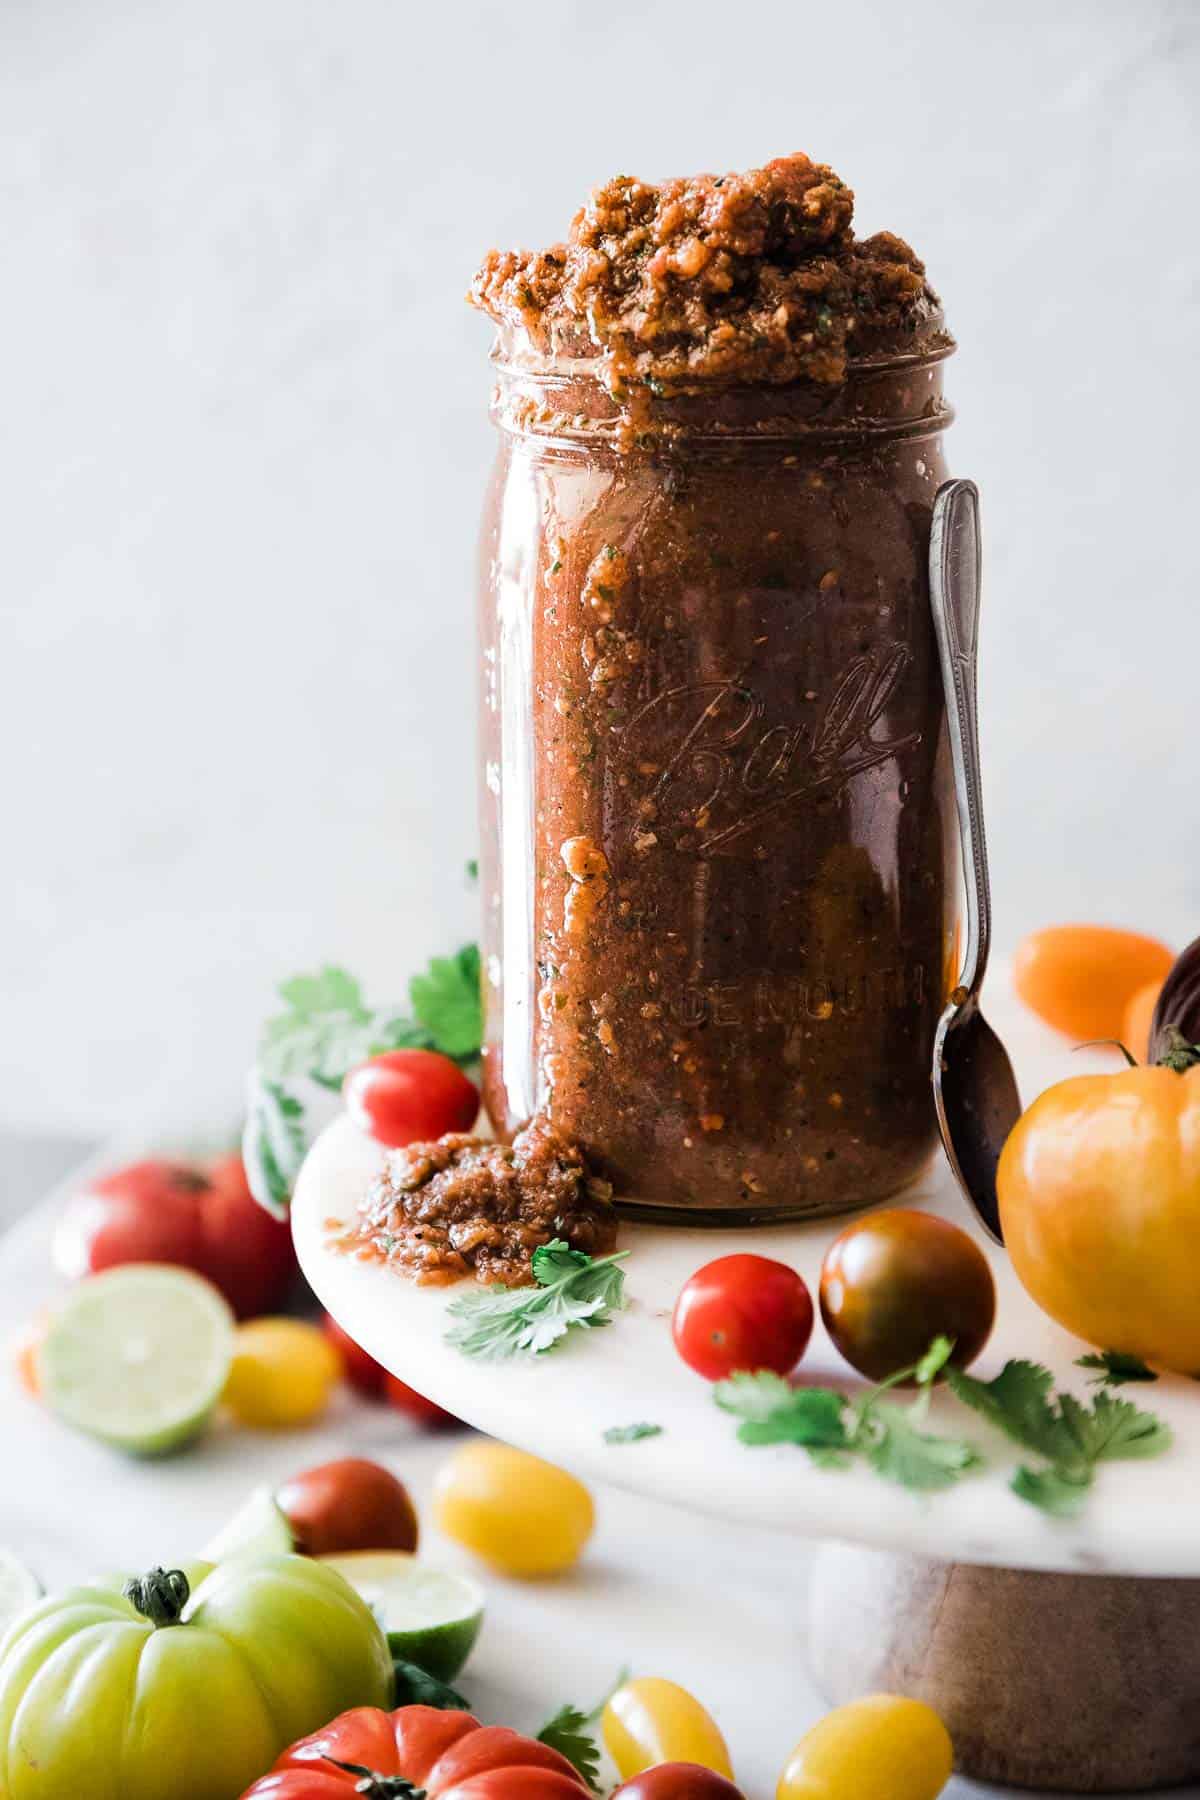 Chipotle salsa in a mason jar atop a cake stand. There are tomatoes and limes around it.